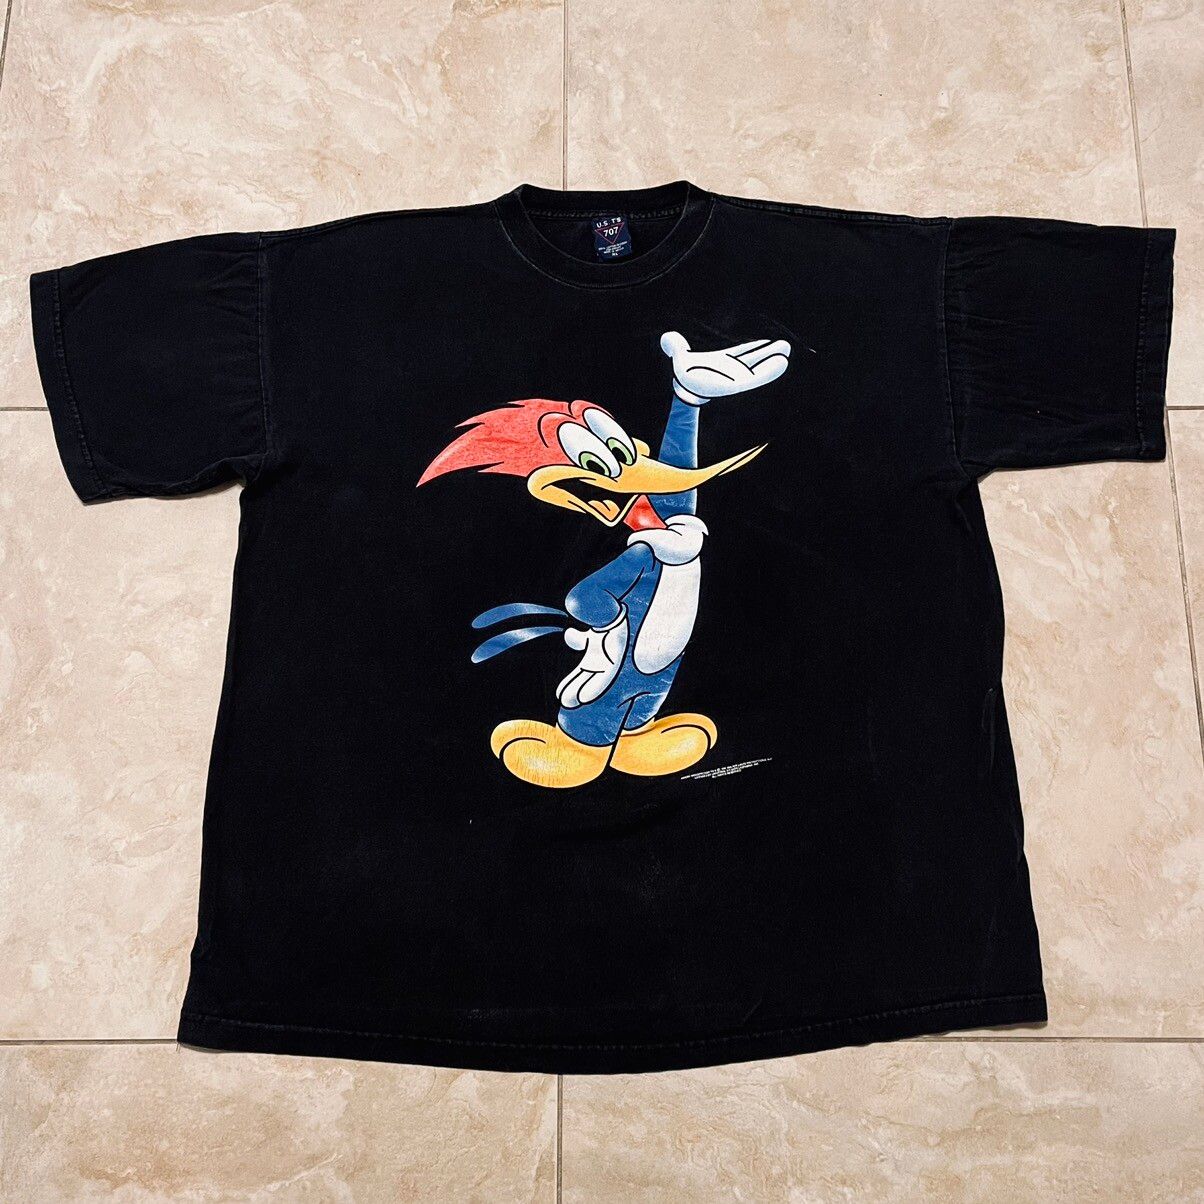 Vintage 1998 WOODY THE WOODPECKER TEE! Size US XL / EU 56 / 4 - 2 Preview